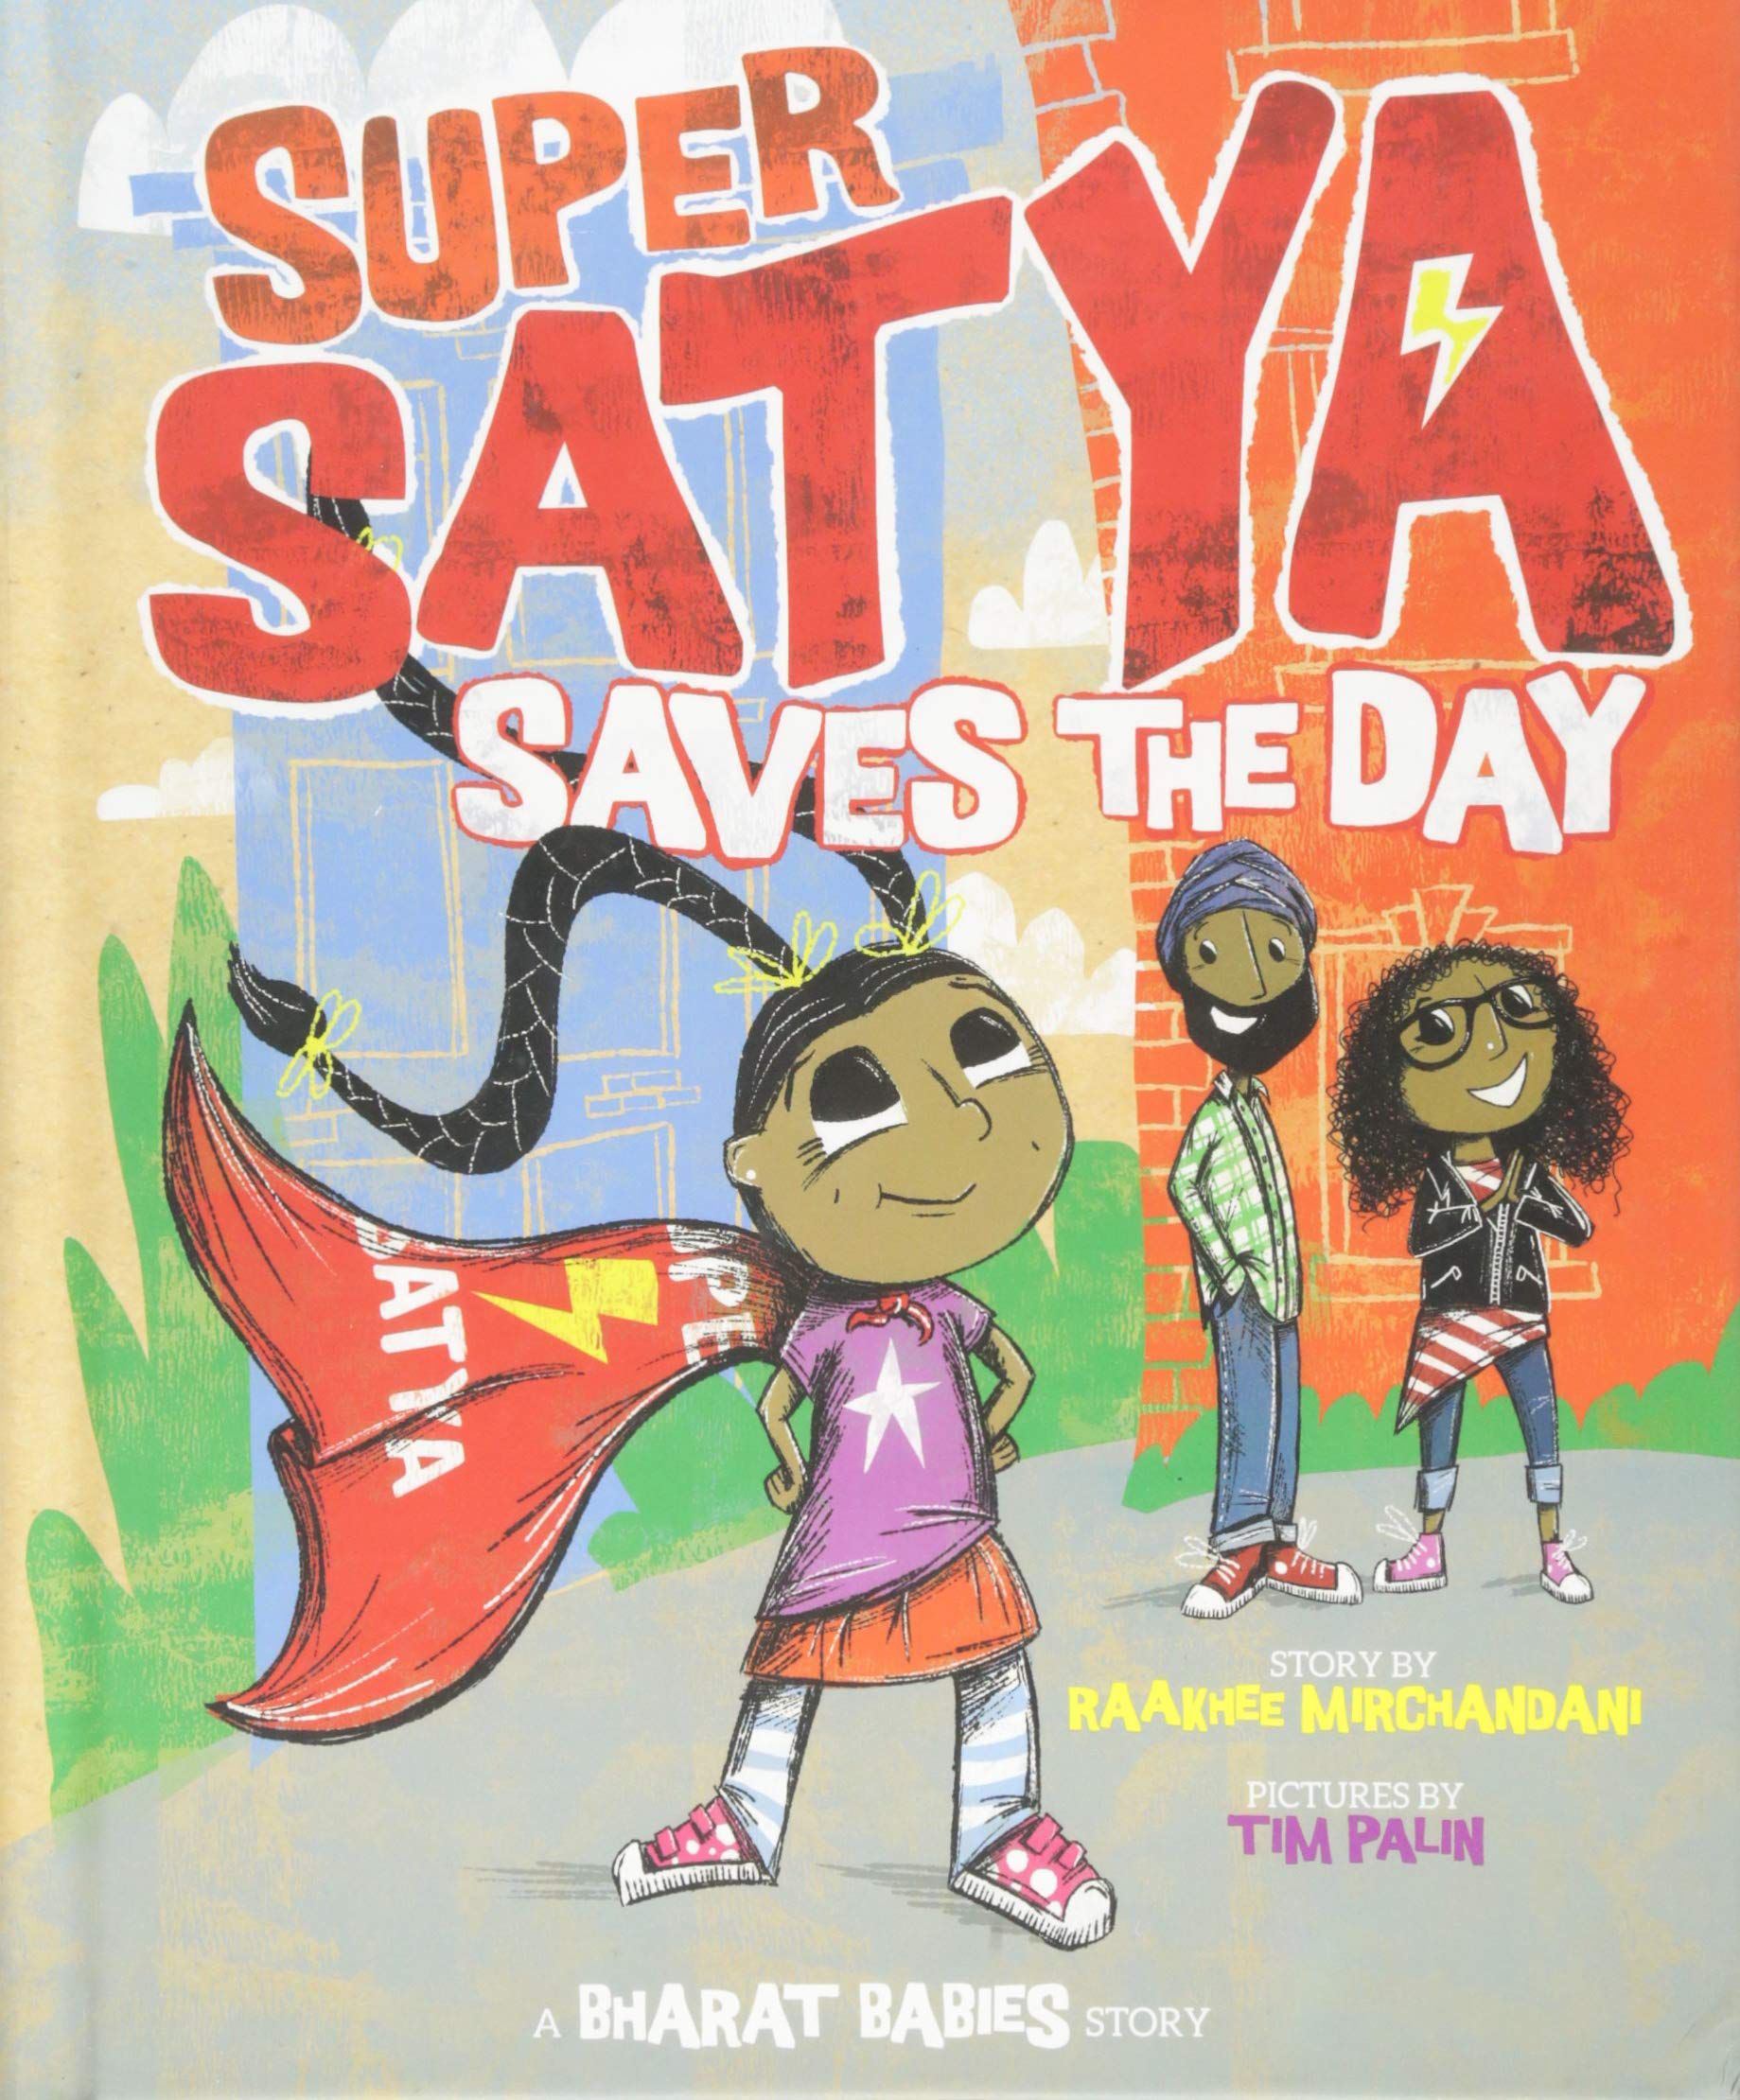 cover of sper satya saves the day